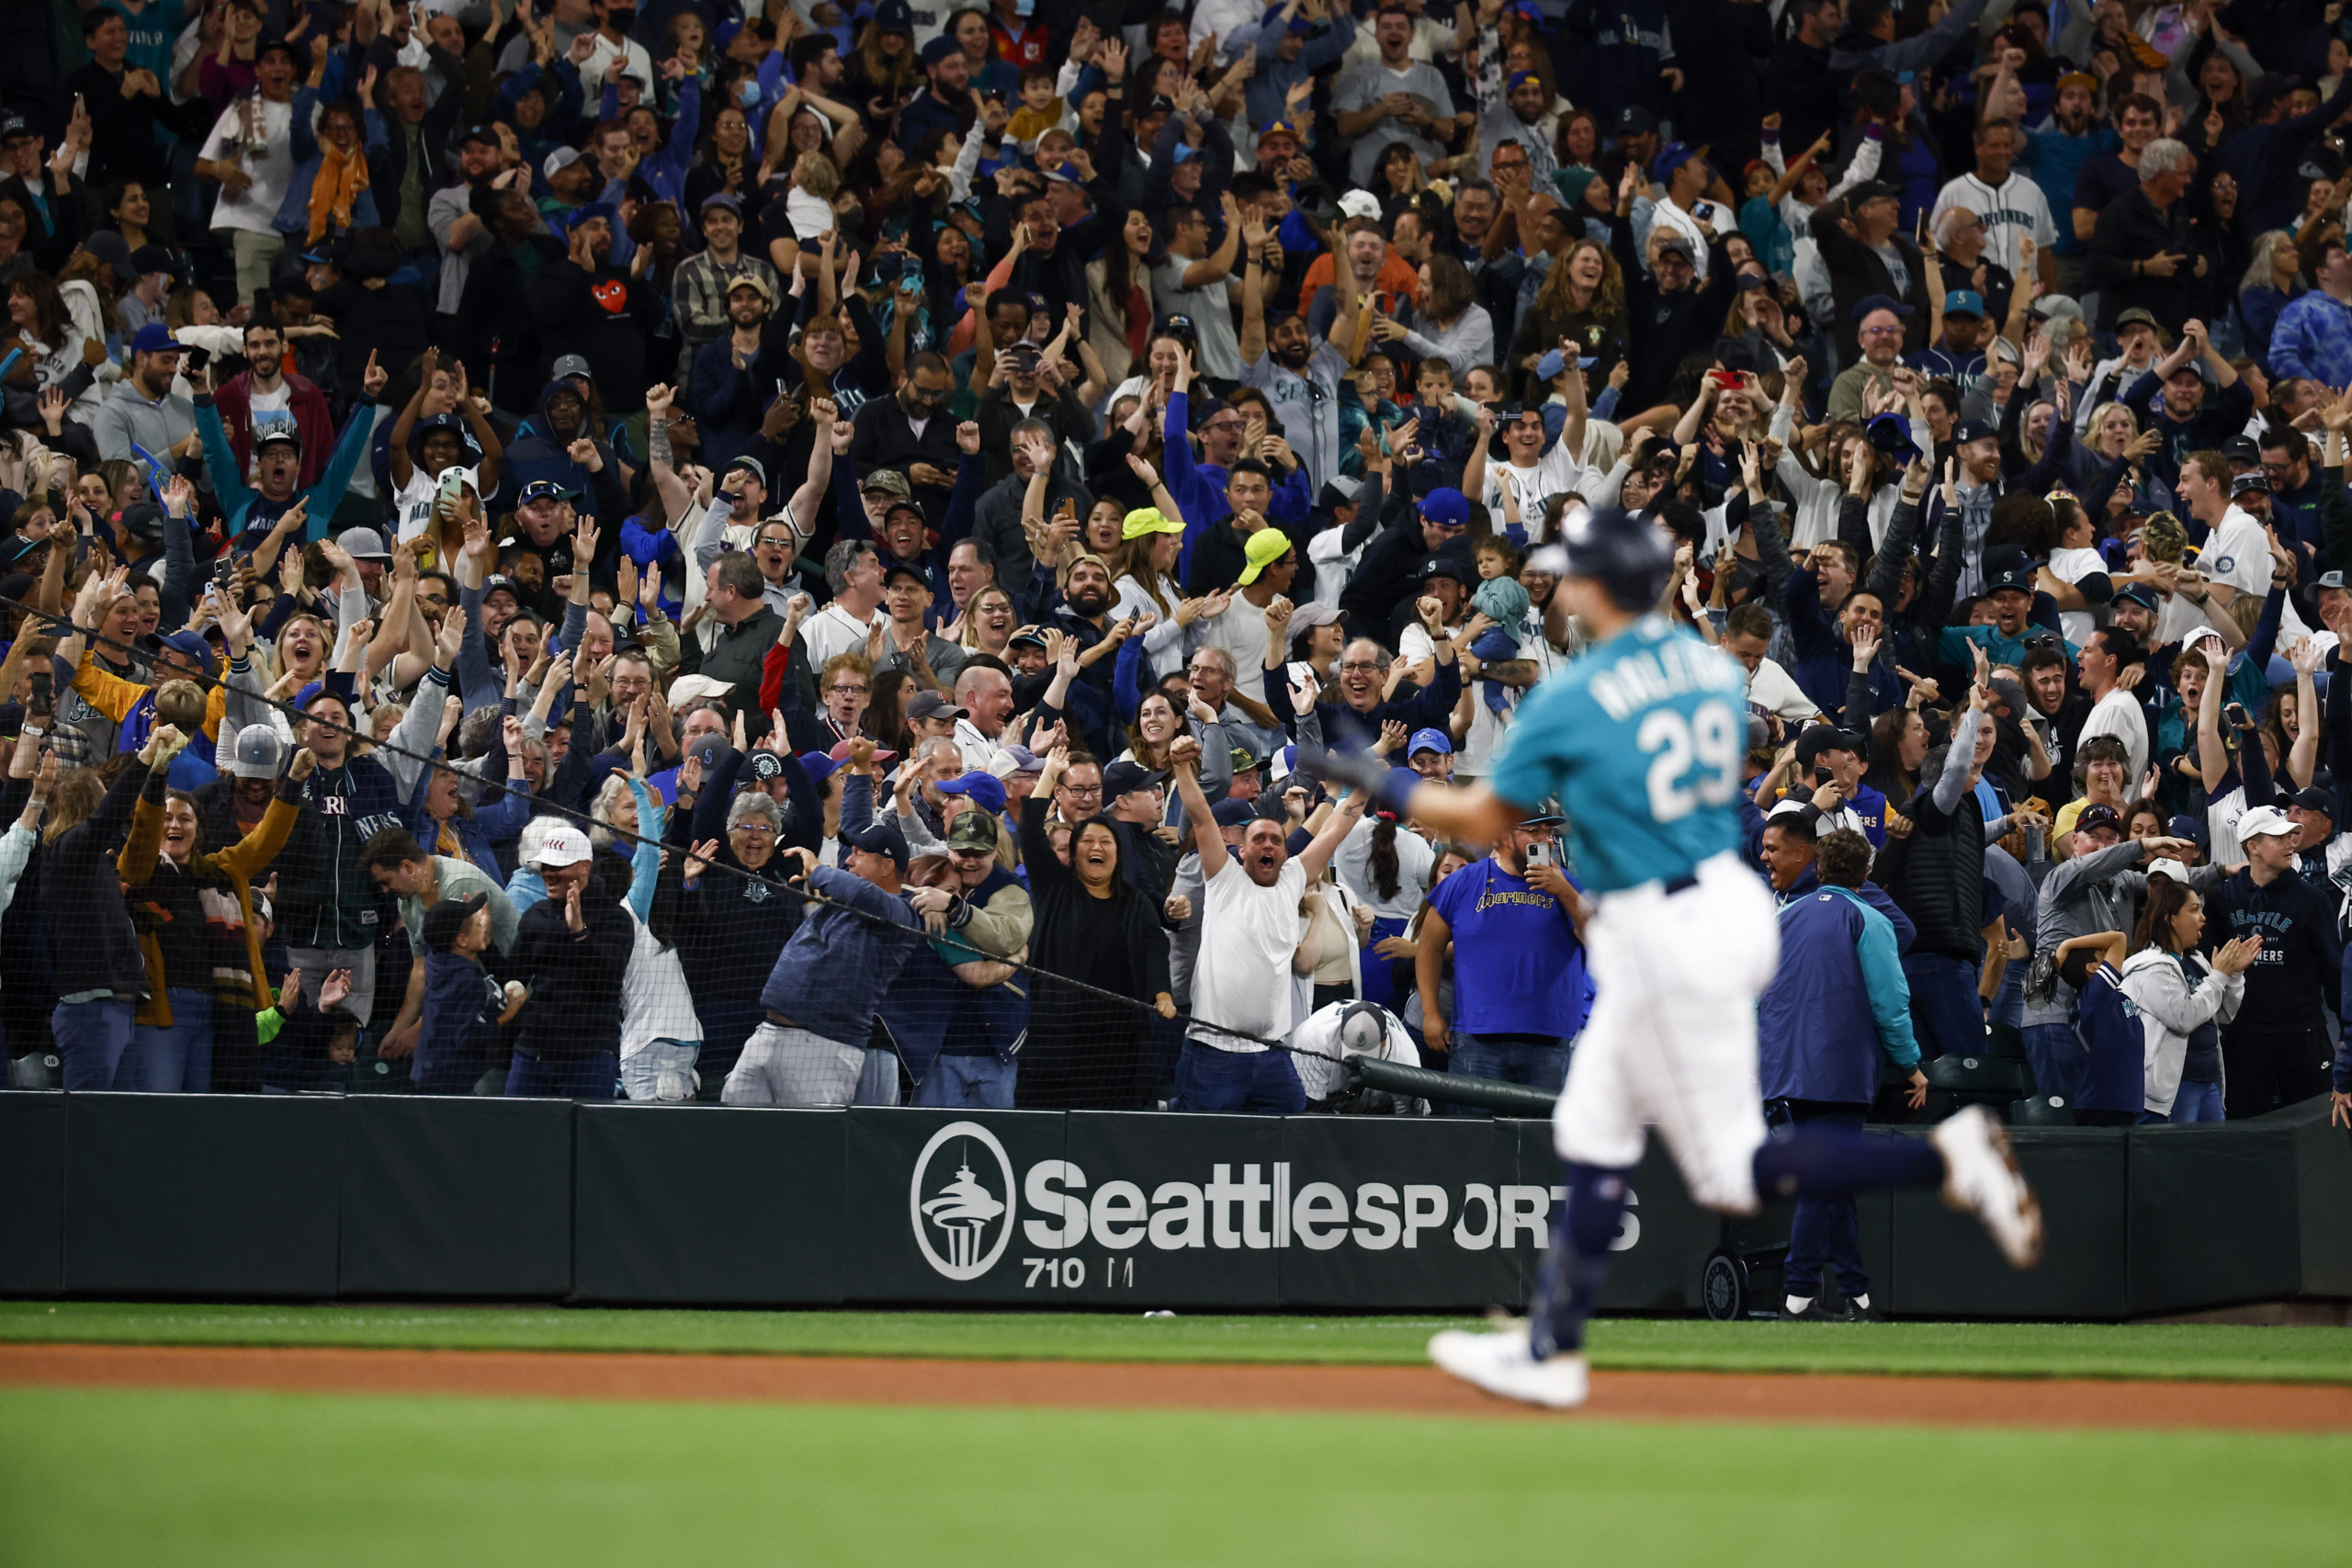 Walk-off homer ends Seattle Mariners' 20-season playoff drought